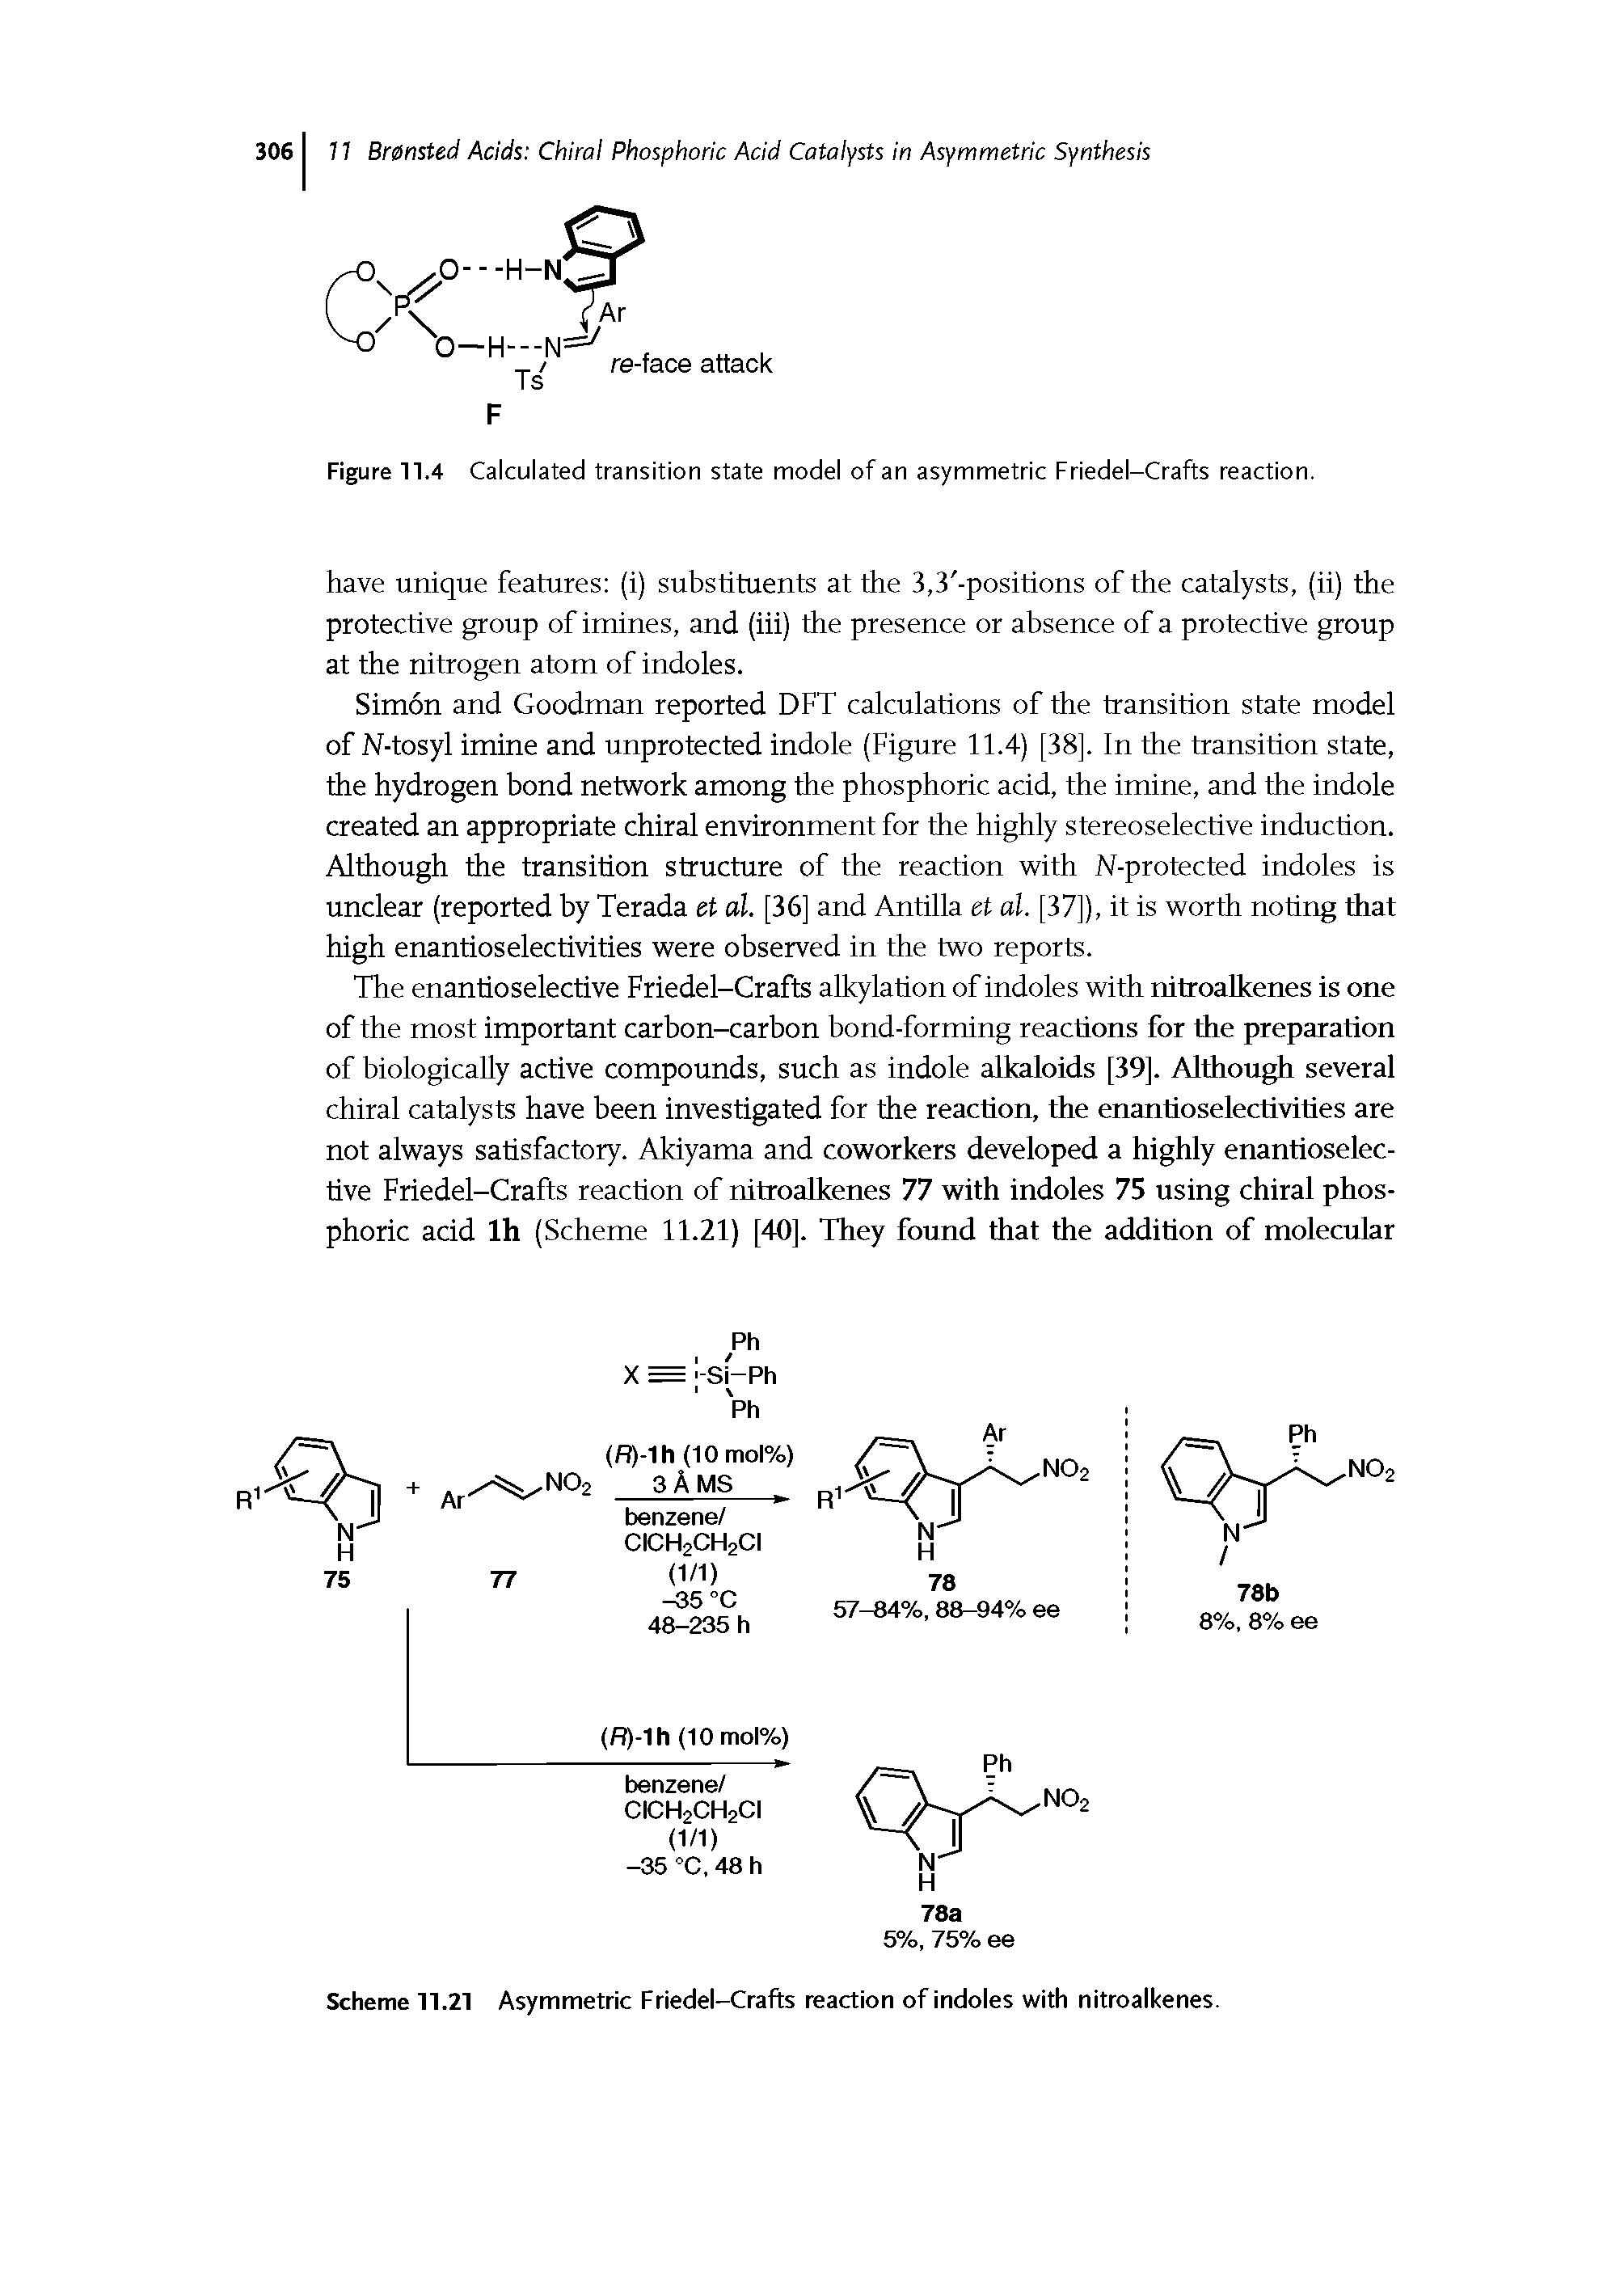 Figure 11.4 Calculated transition state model of an asymmetric Friedel-Crafts reaction.